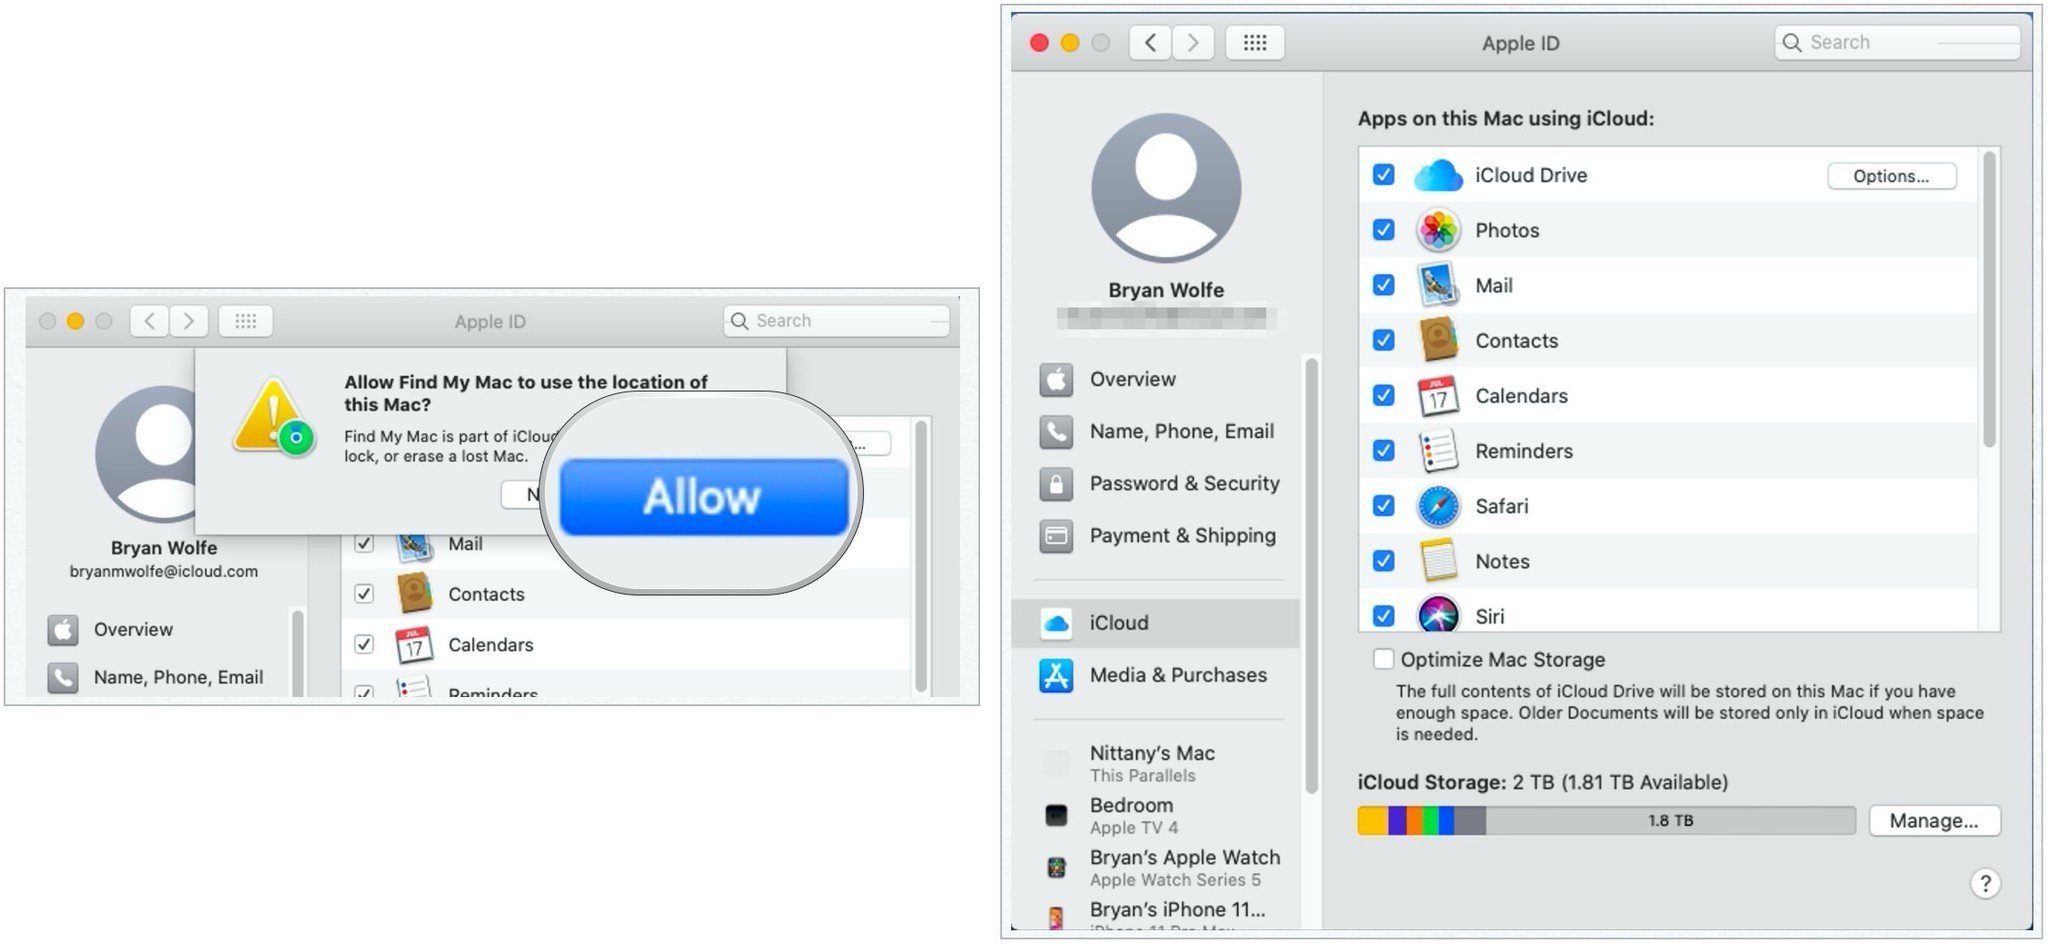 To set up iCloud on Mac, choose Allow, then confirm the checkboxes next to all the apps that use iCloud.